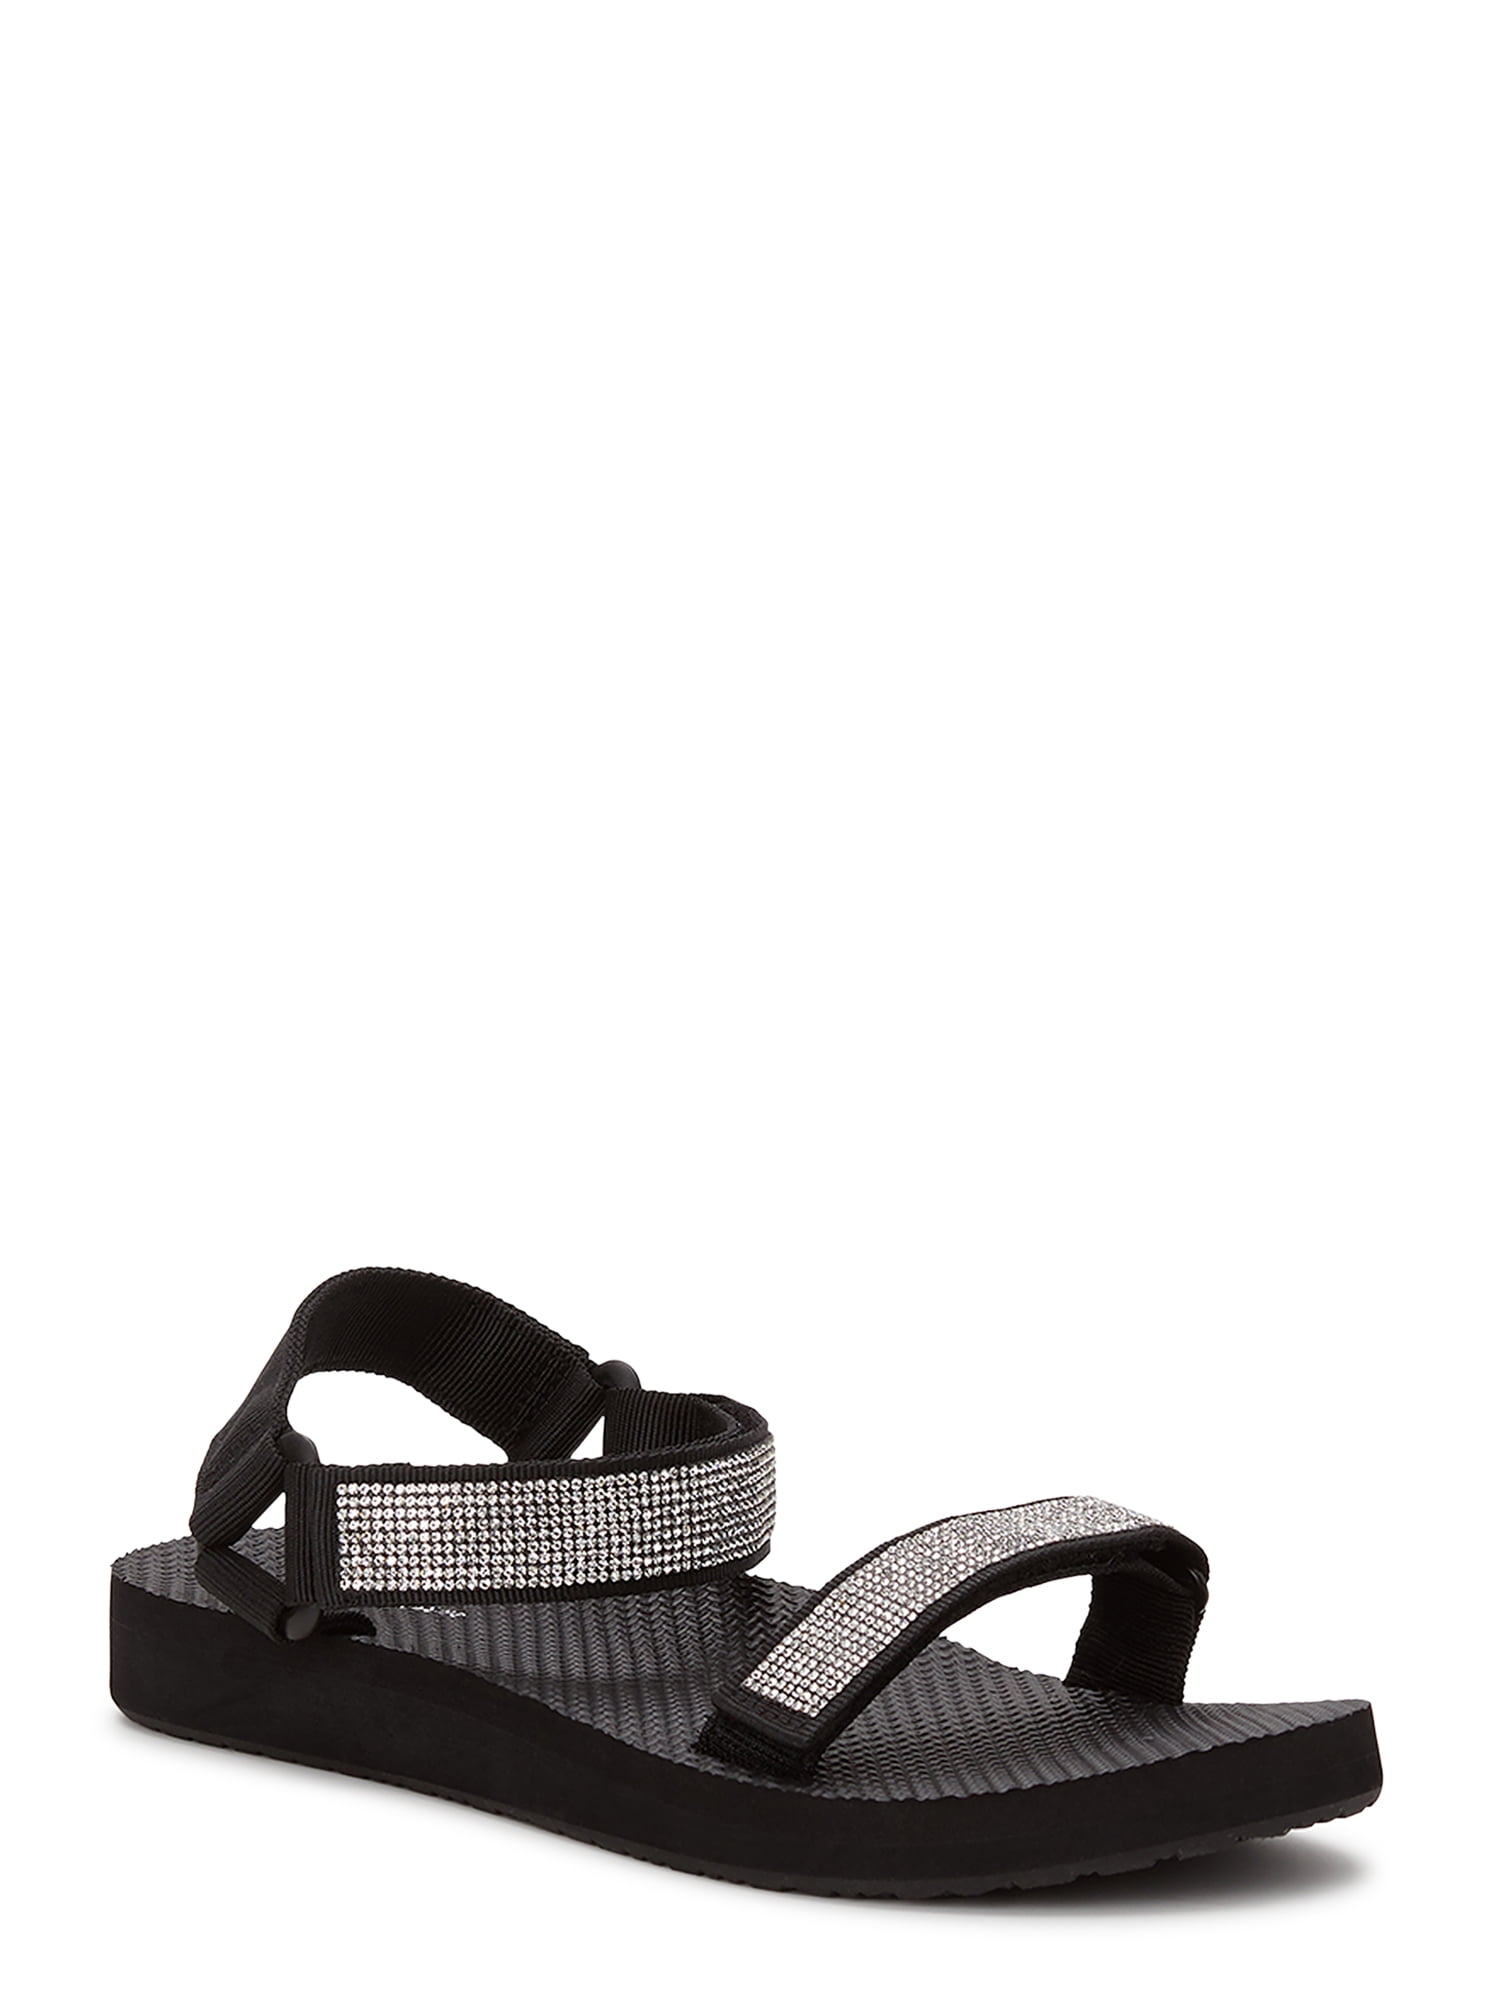 Time and Tru Women's Embellished Nature Sandal